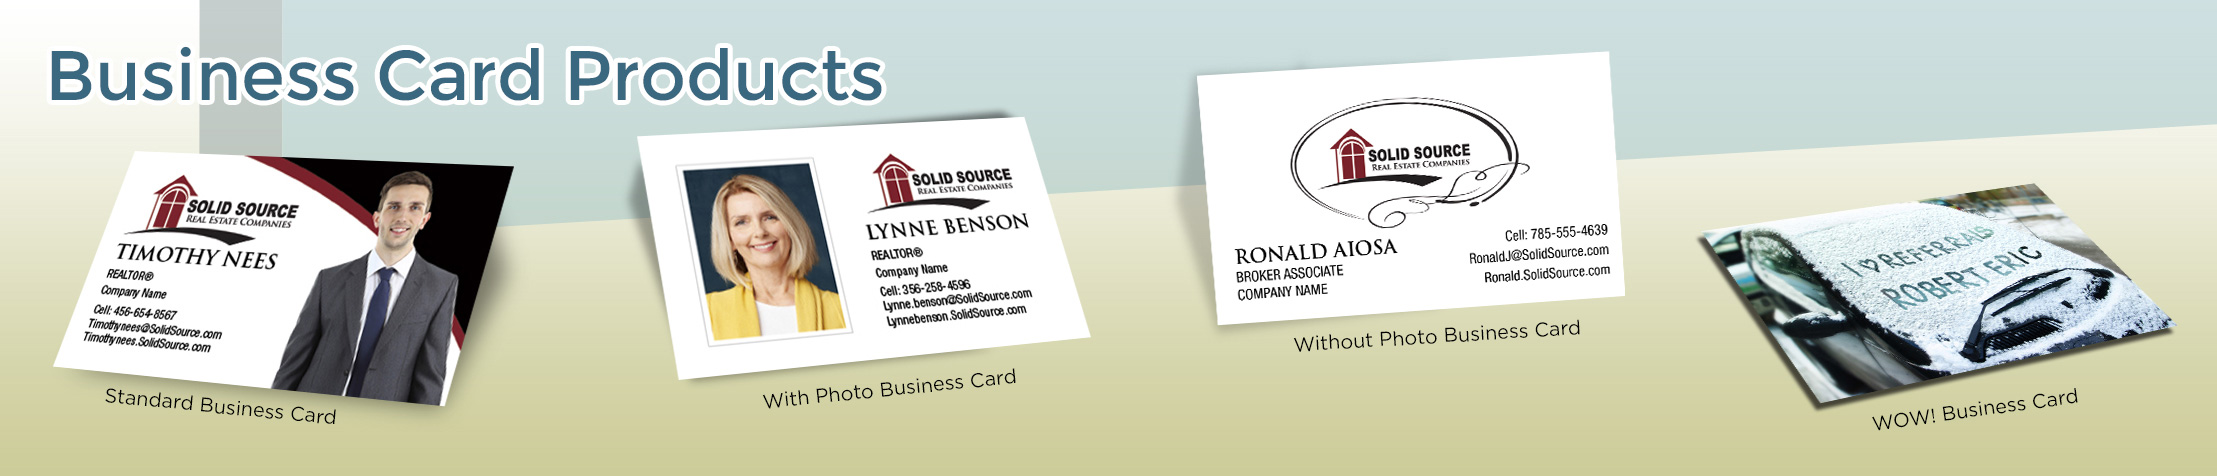 Solid Source Real Estate Business Card Products - Solid Source - Unique, Custom Business Cards Printed on Quality Stock with Creative Designs for Realtors | BestPrintBuy.com